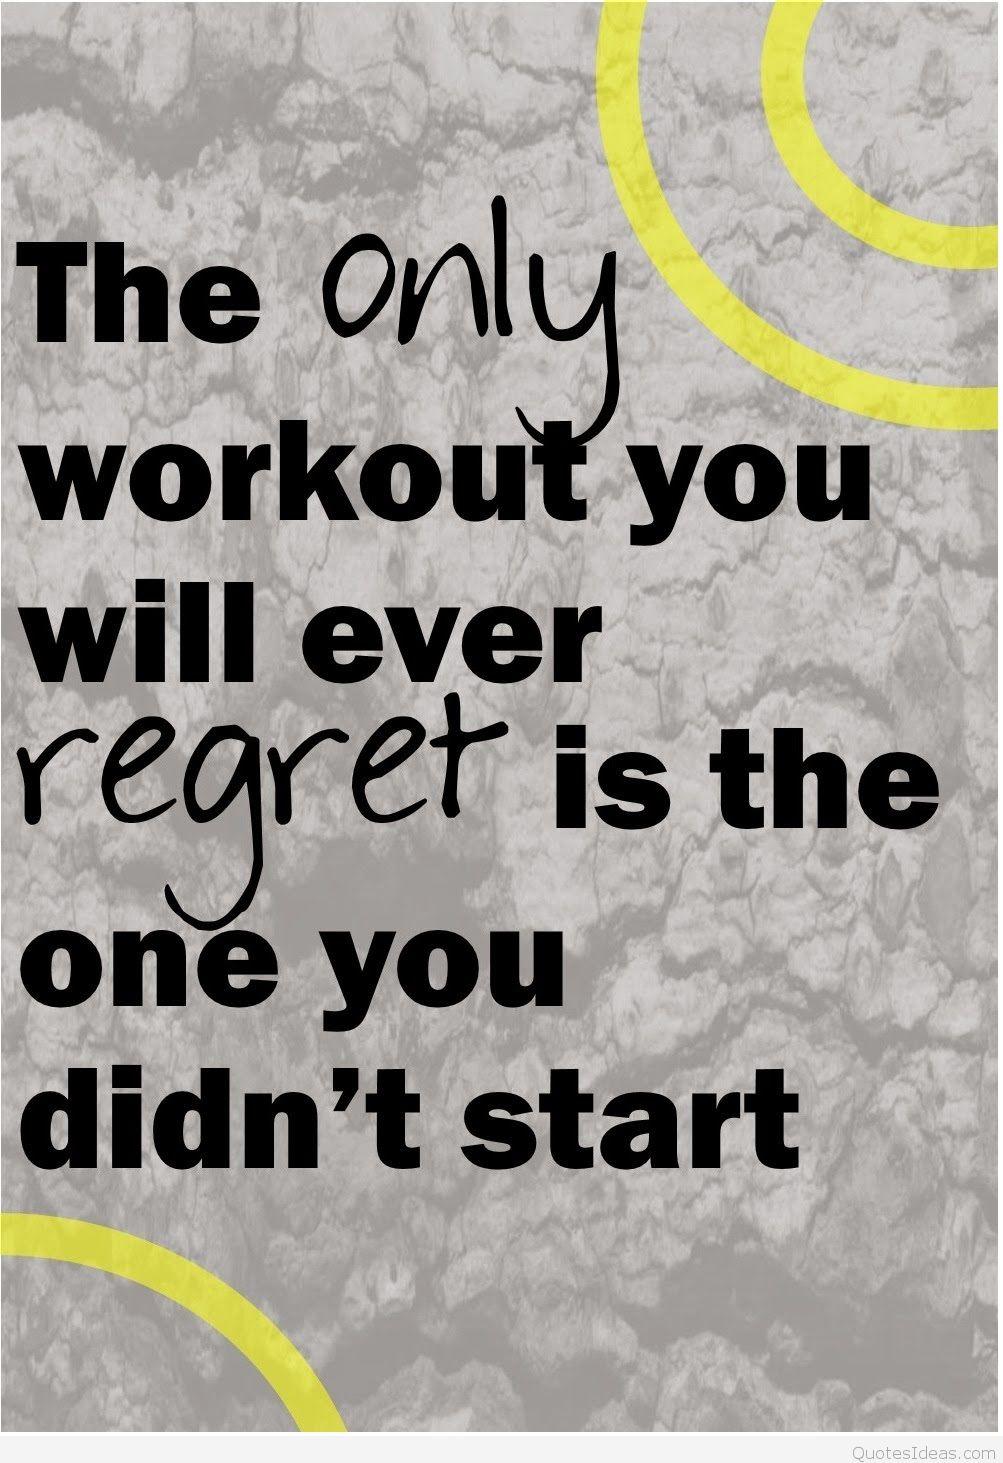 Motivational Workout Quotes iPhone Wallpaper. Best Quotes for your Life